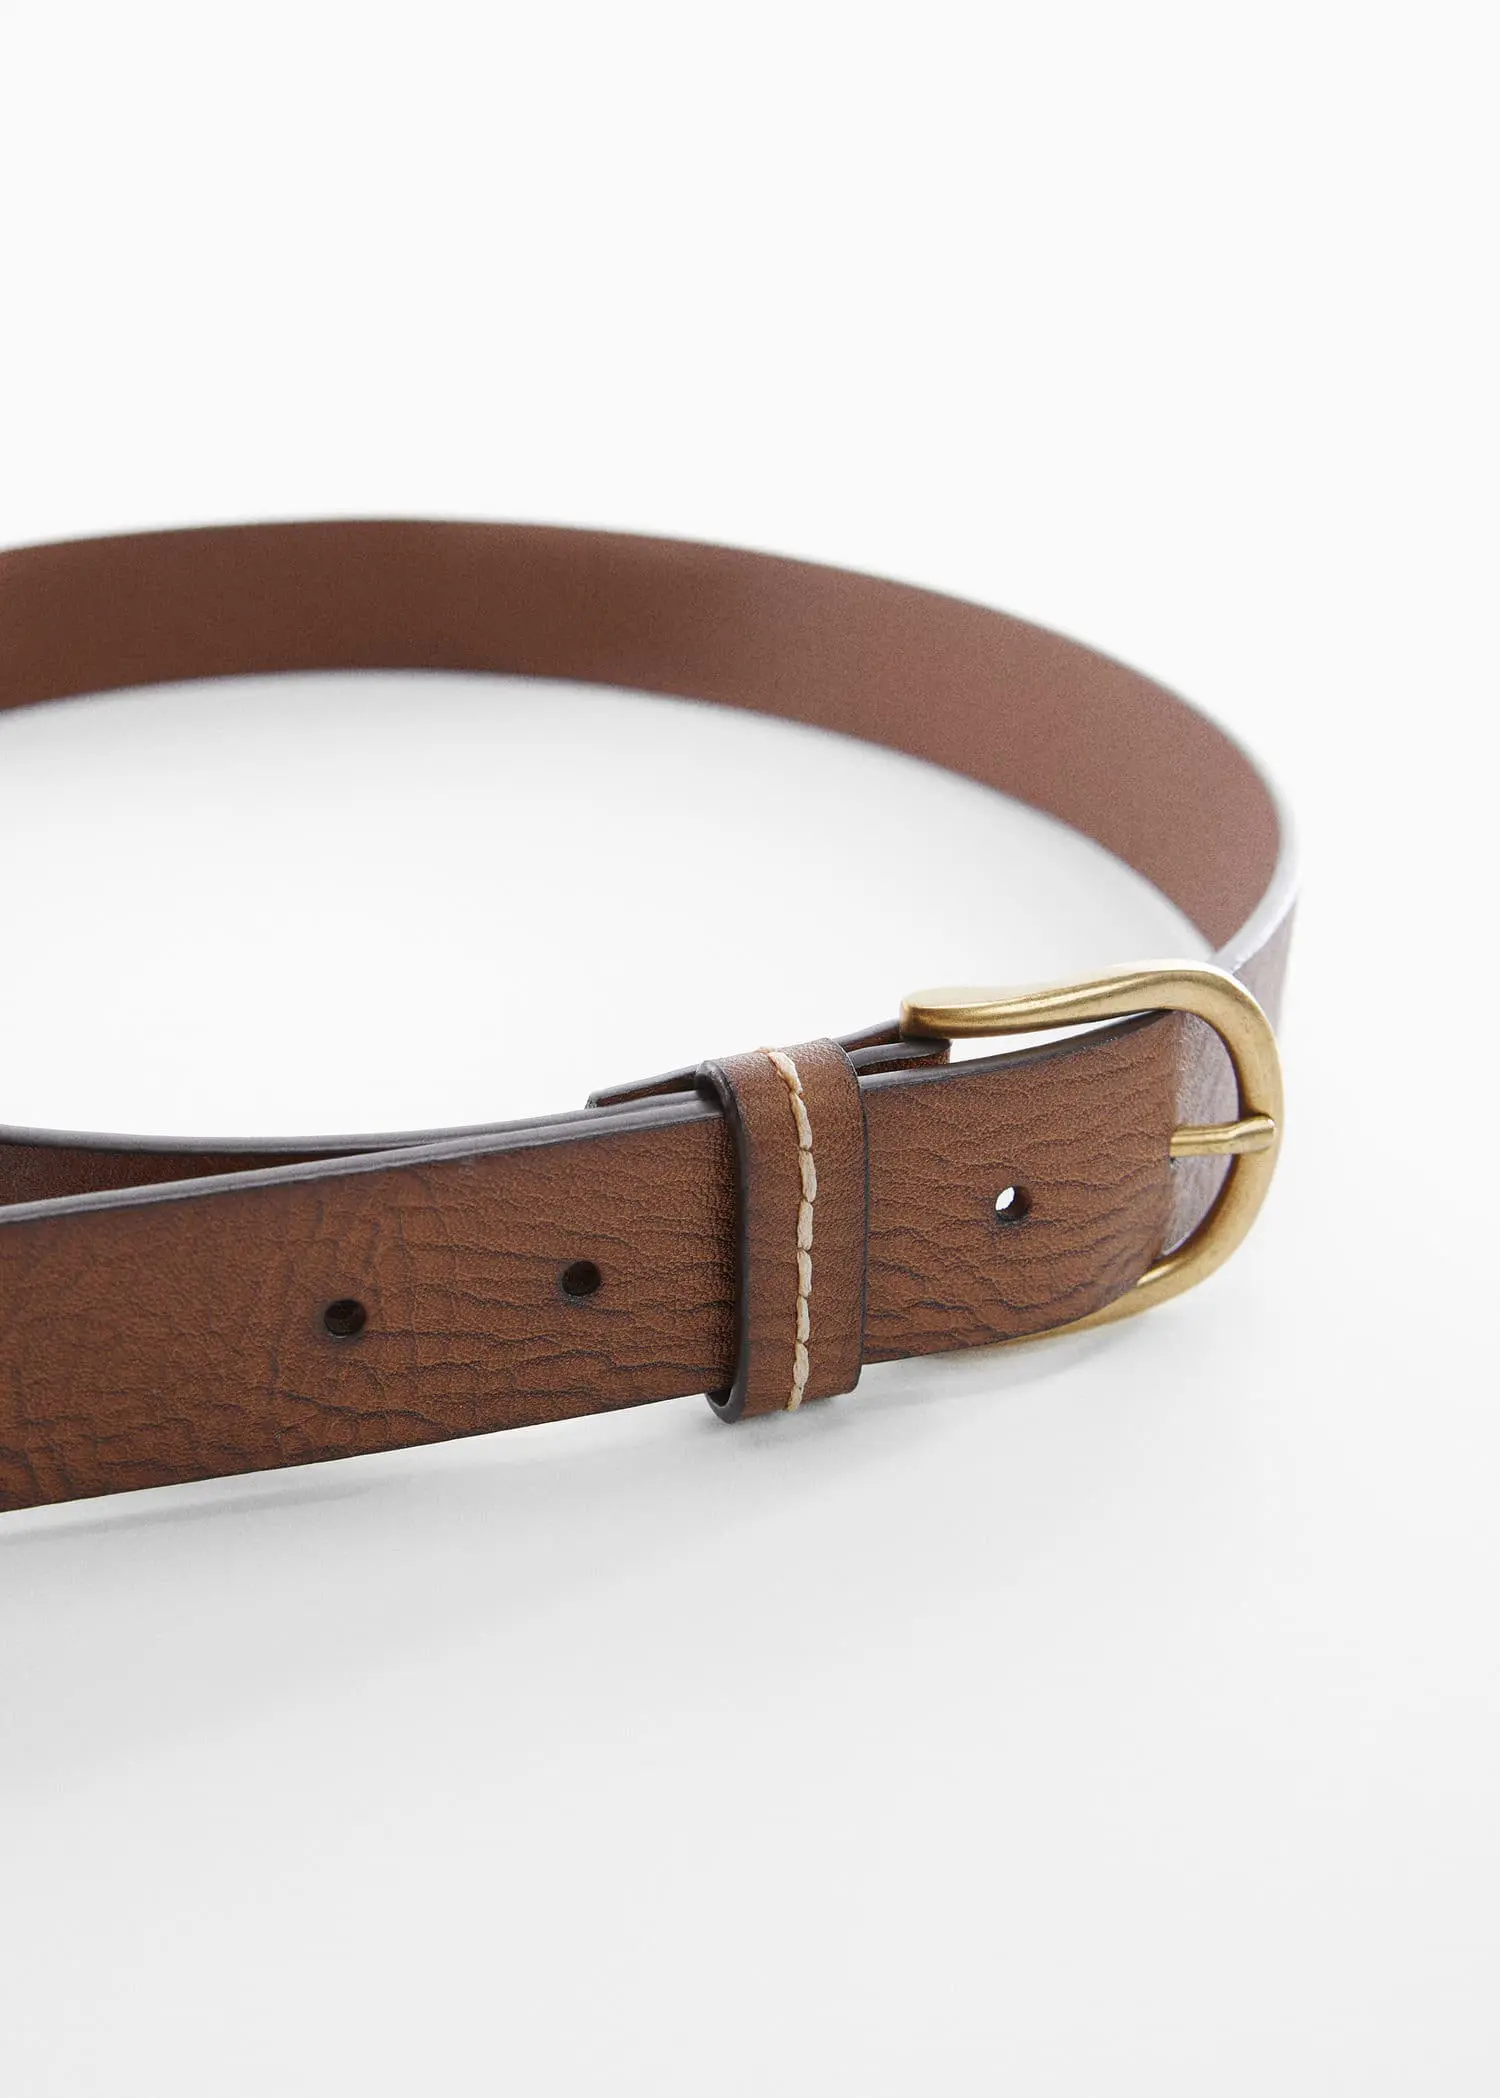 Mango Pebbled leather belt. a close-up of a brown leather belt with a brass buckle. 